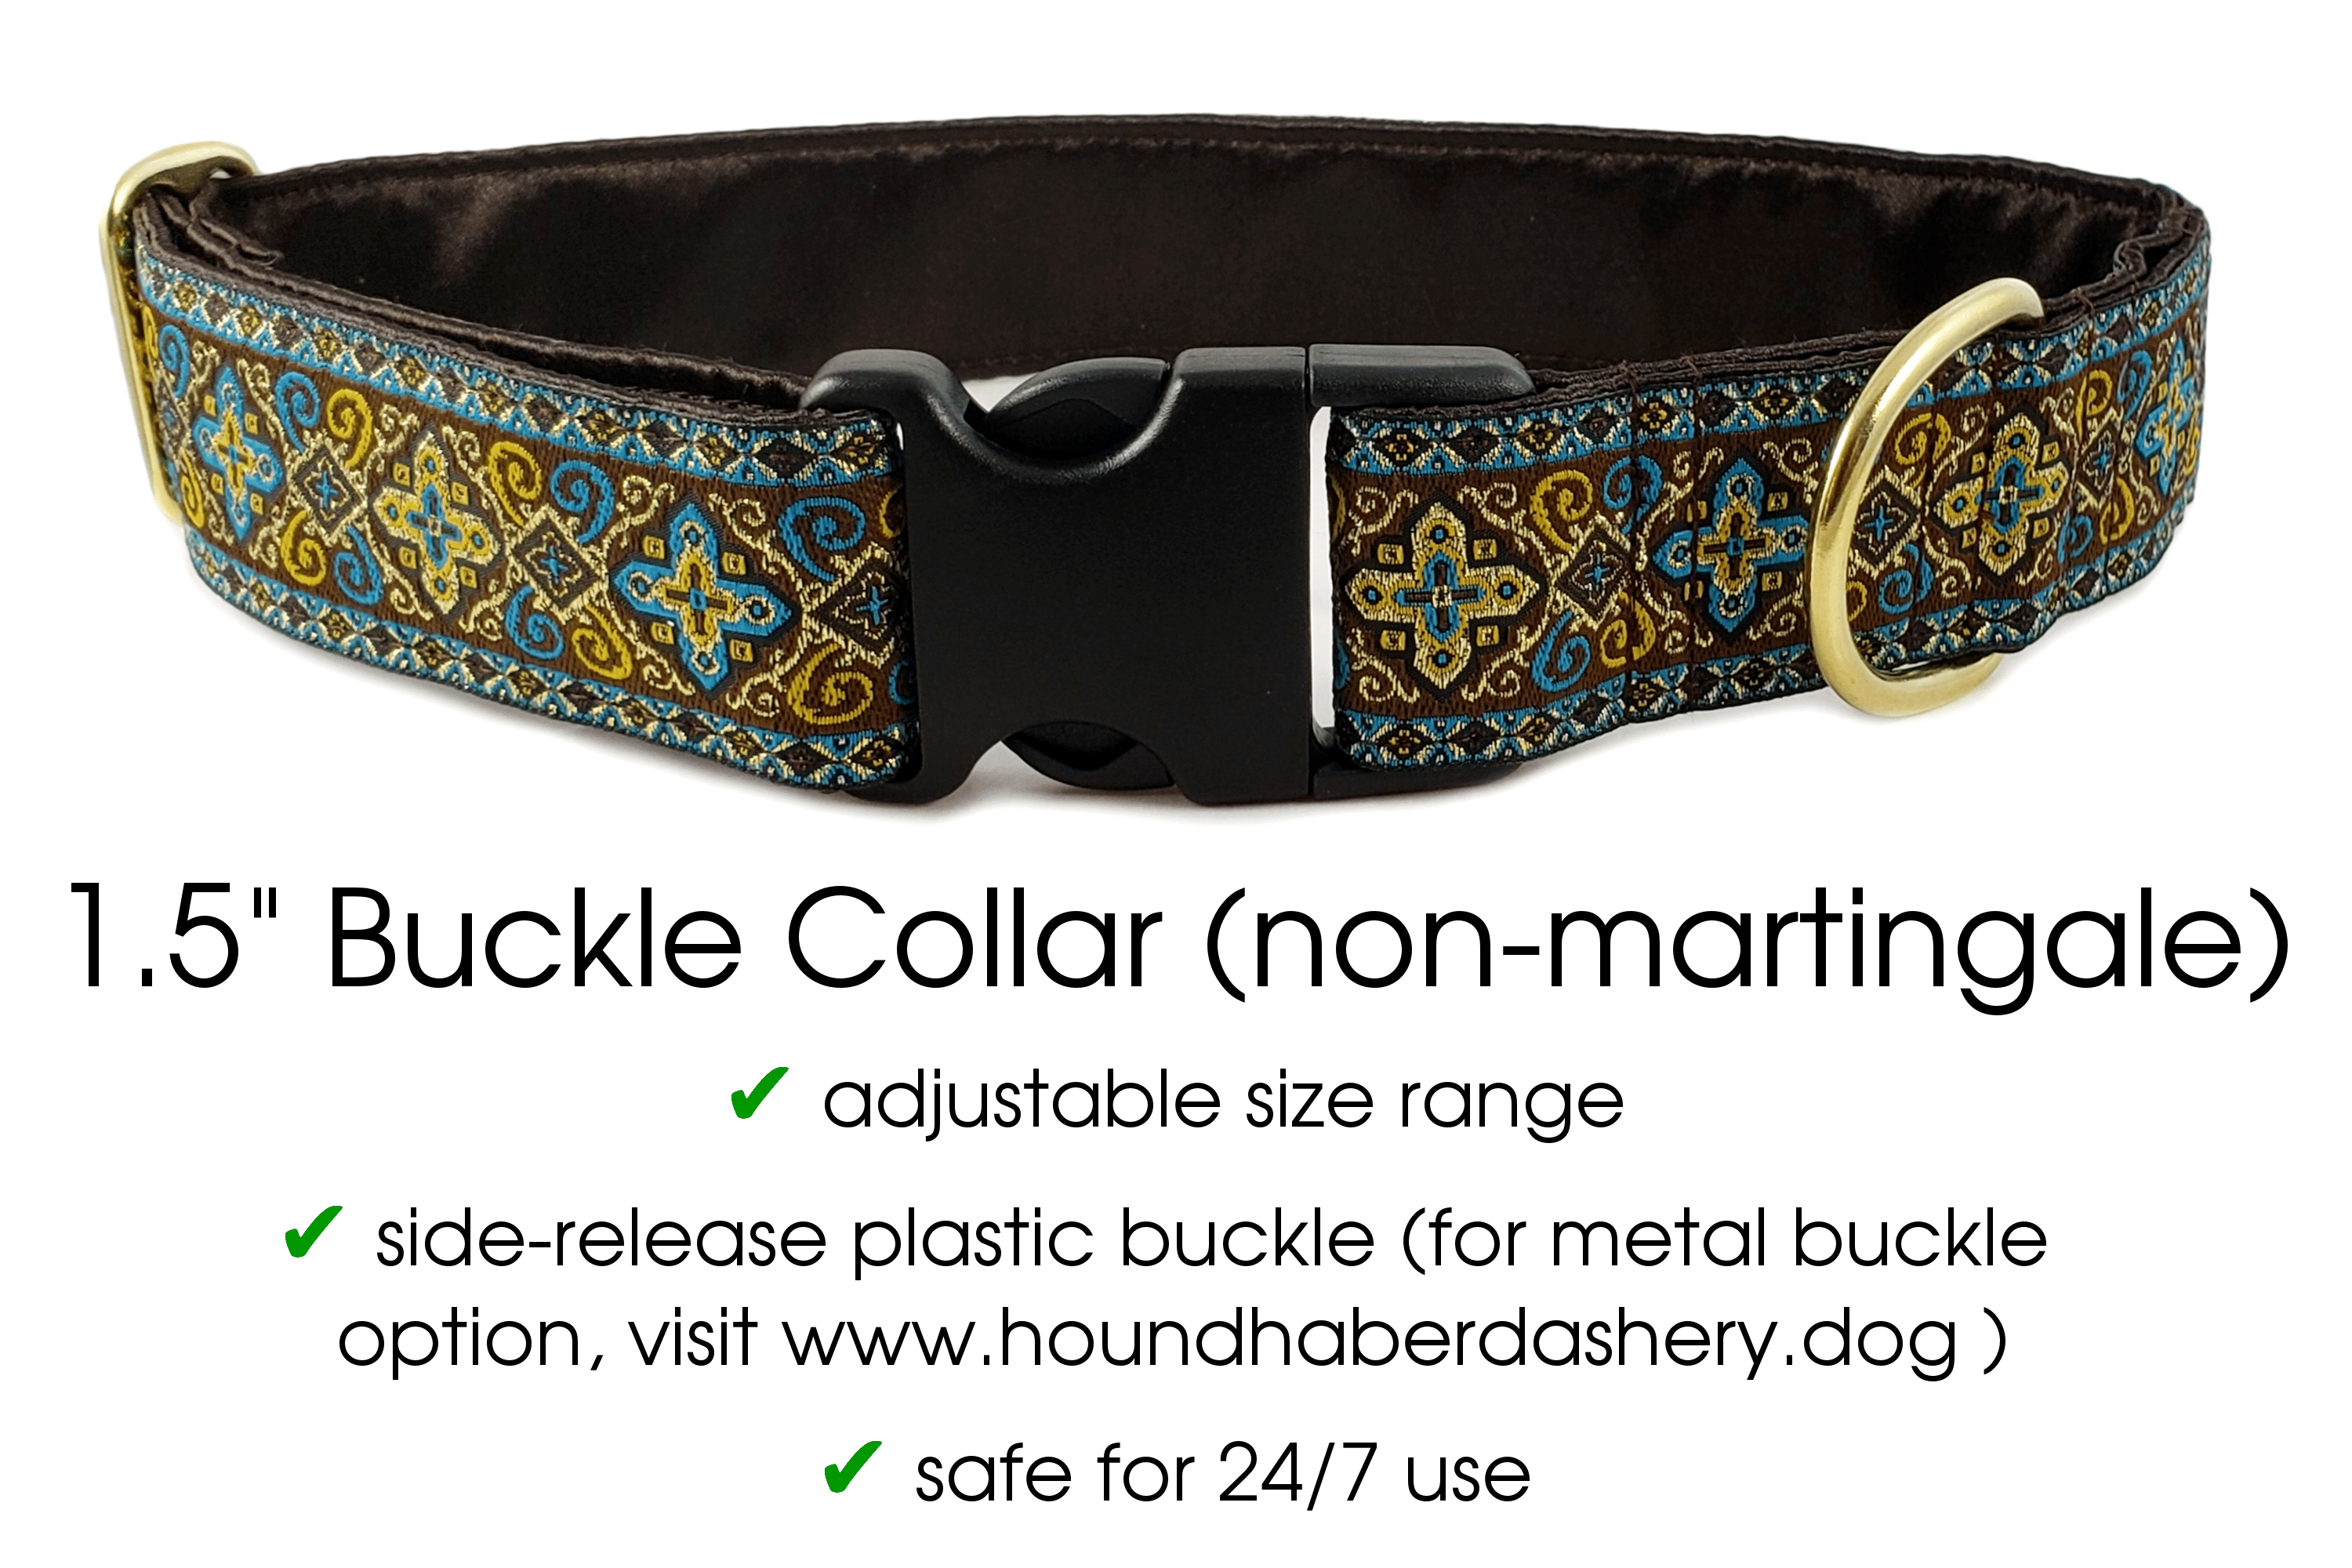 The Hound Haberdashery Collar Nobility in Brown & Turquoise - Martingale Dog Collar or Buckle Dog Collar - 1.5" Width